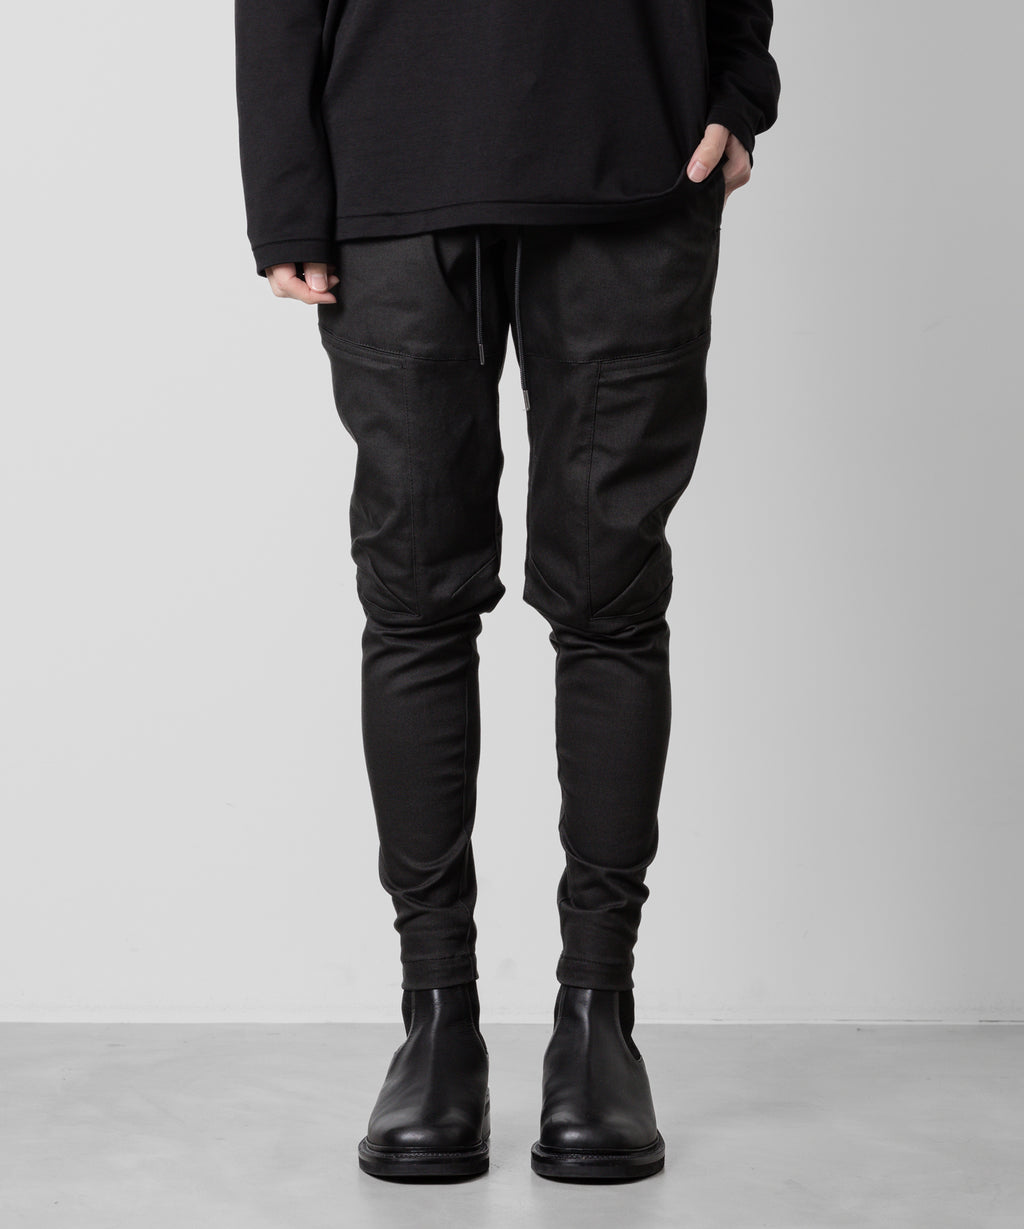 【ATTACHMENT】ATTACHMENT アタッチメントのRUBBER STRETCH TWILL EASY CARGO TROUSERS - D.GRAY  公式通販サイトsession福岡セレクトショップ